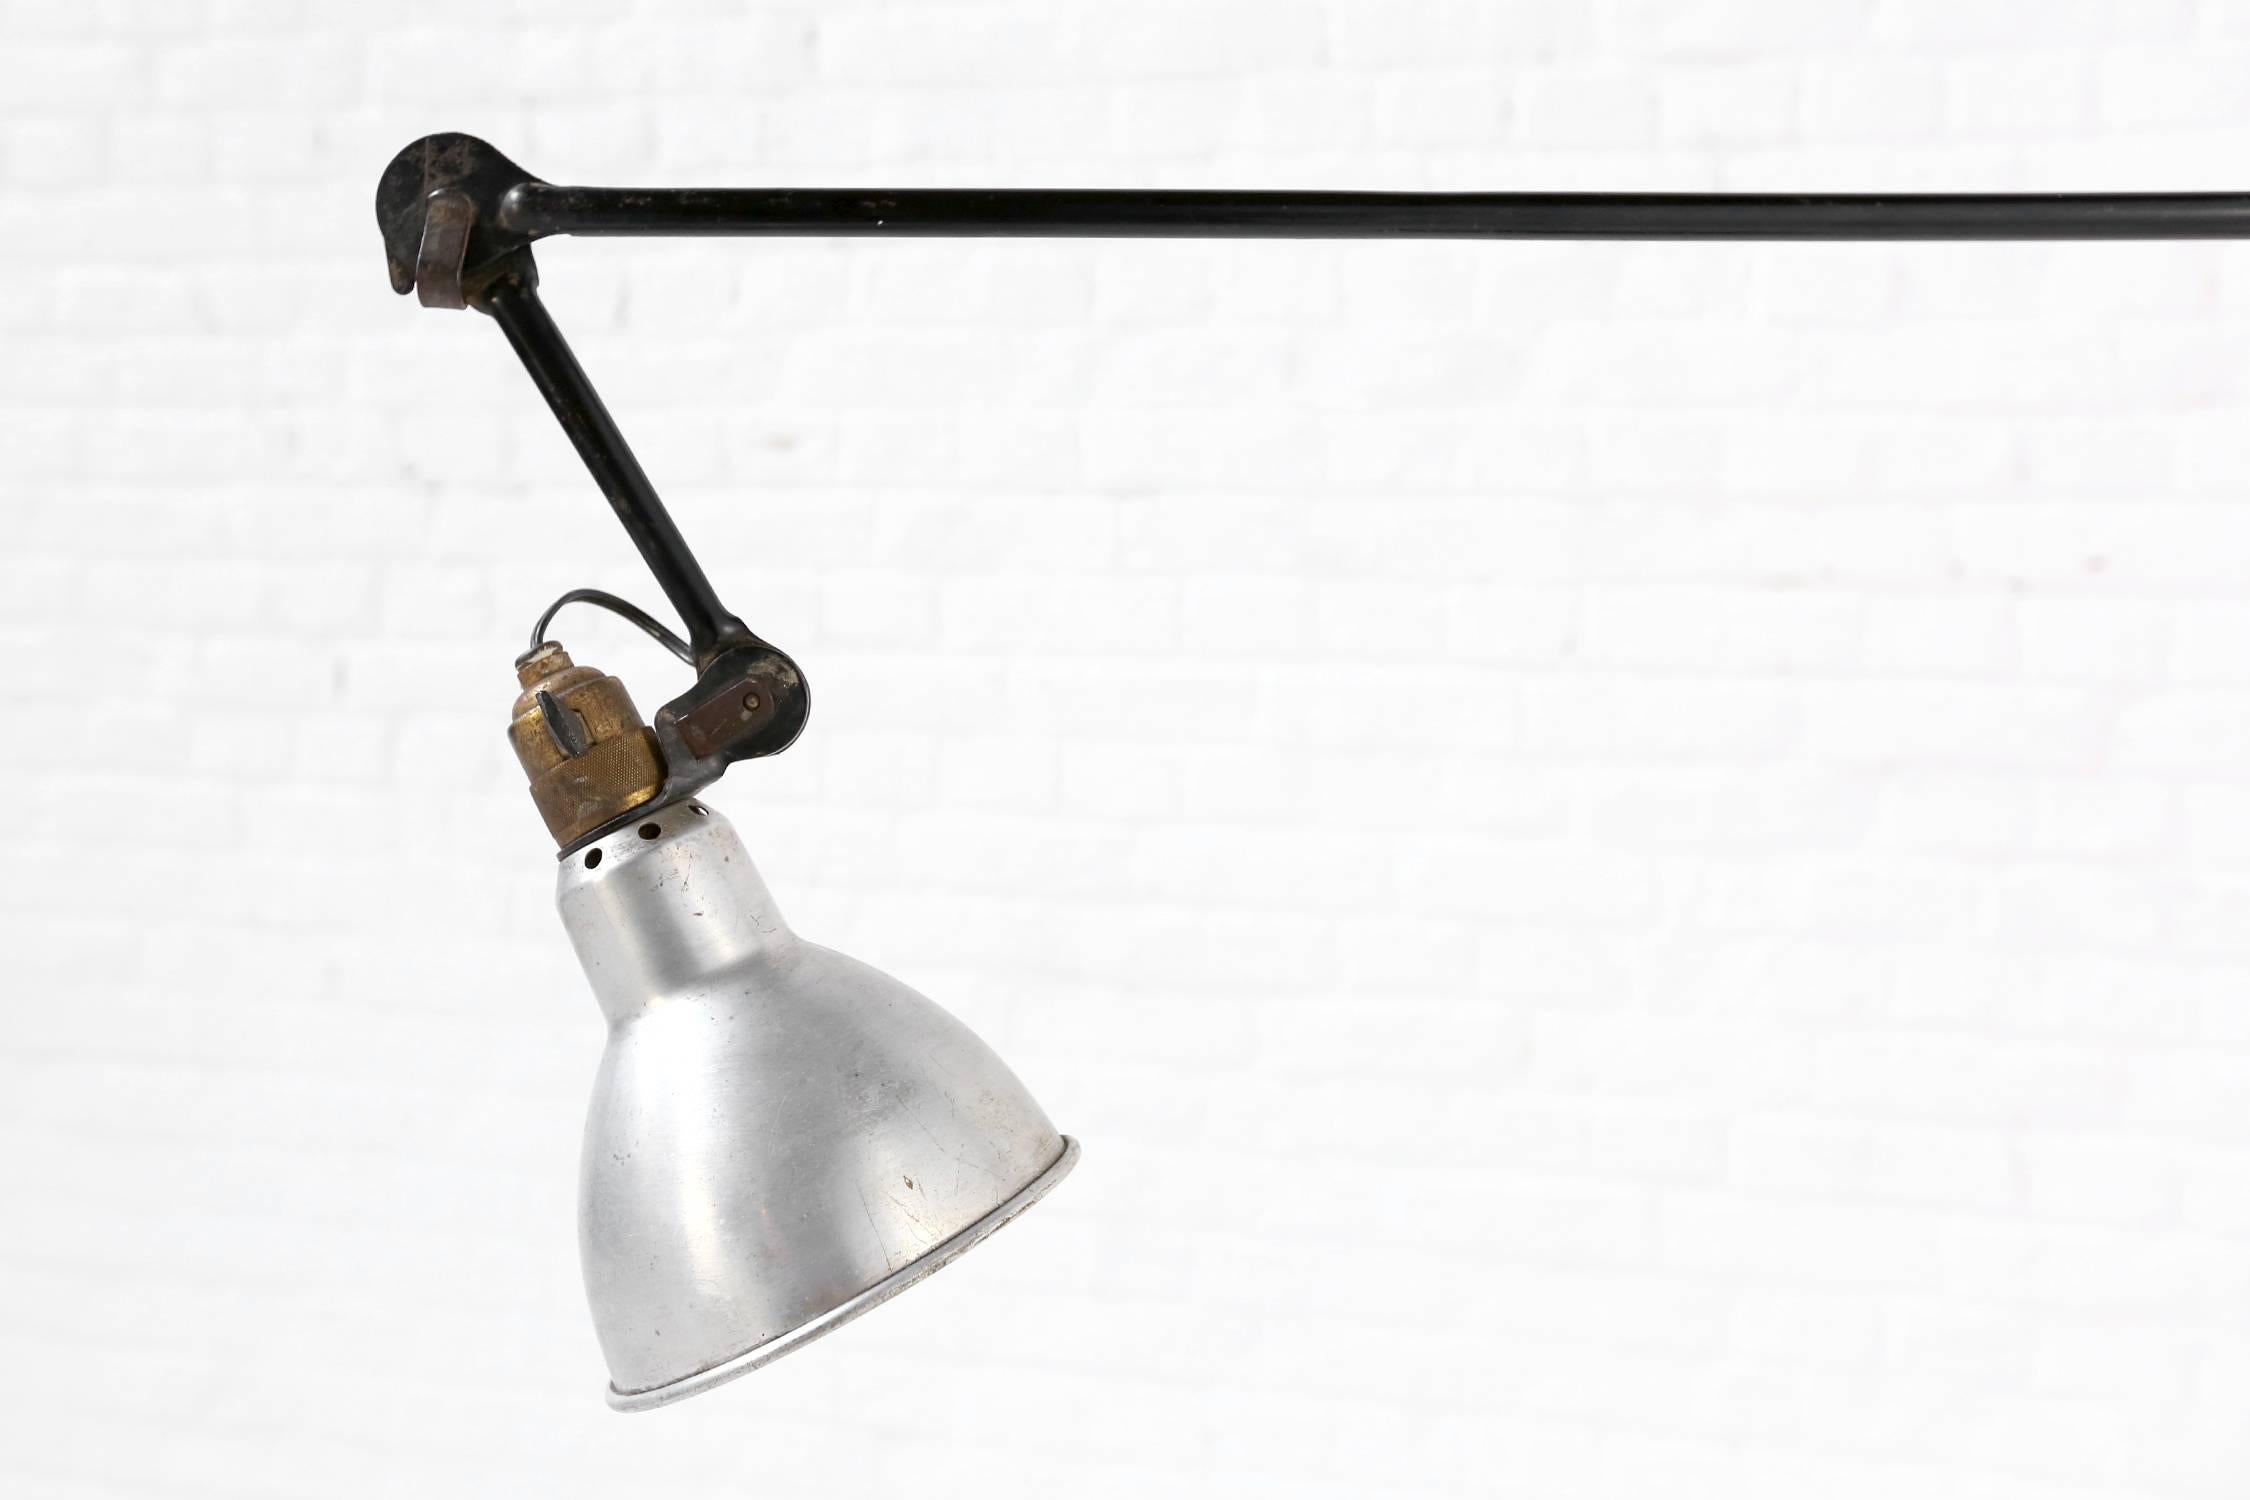 Rare gras 215 floor lamp from the first series with the base and column (terminating in a point) in enameld steel. The lamp is fully adjustable and articulating.
A small piece of the cast iron part is missing (see pic 6), but does not affect the